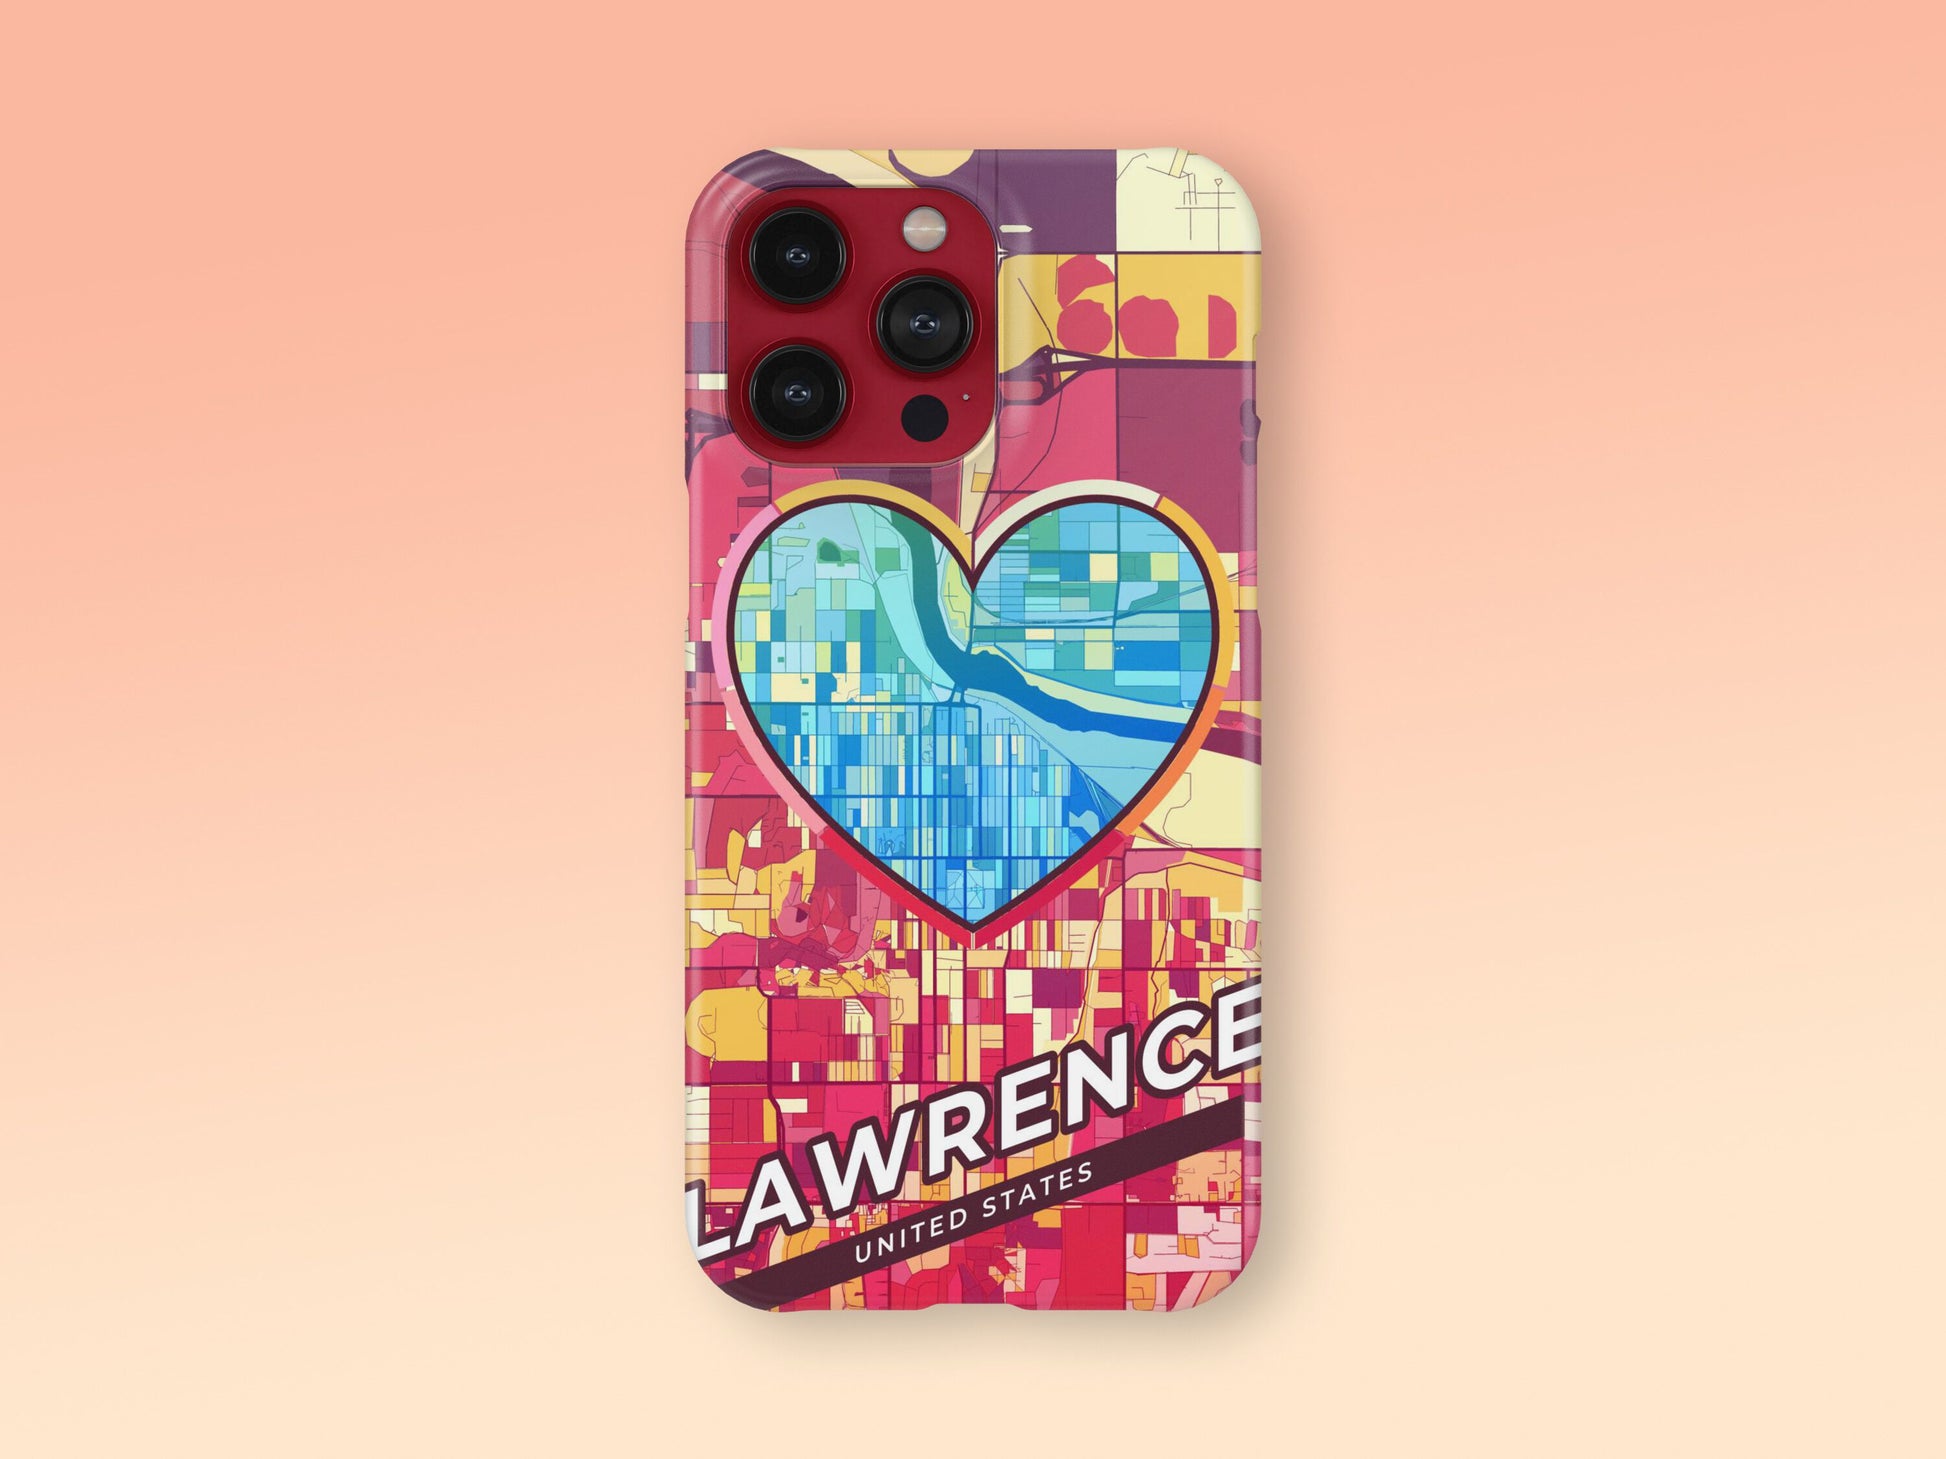 Lawrence Kansas slim phone case with colorful icon. Birthday, wedding or housewarming gift. Couple match cases. 2